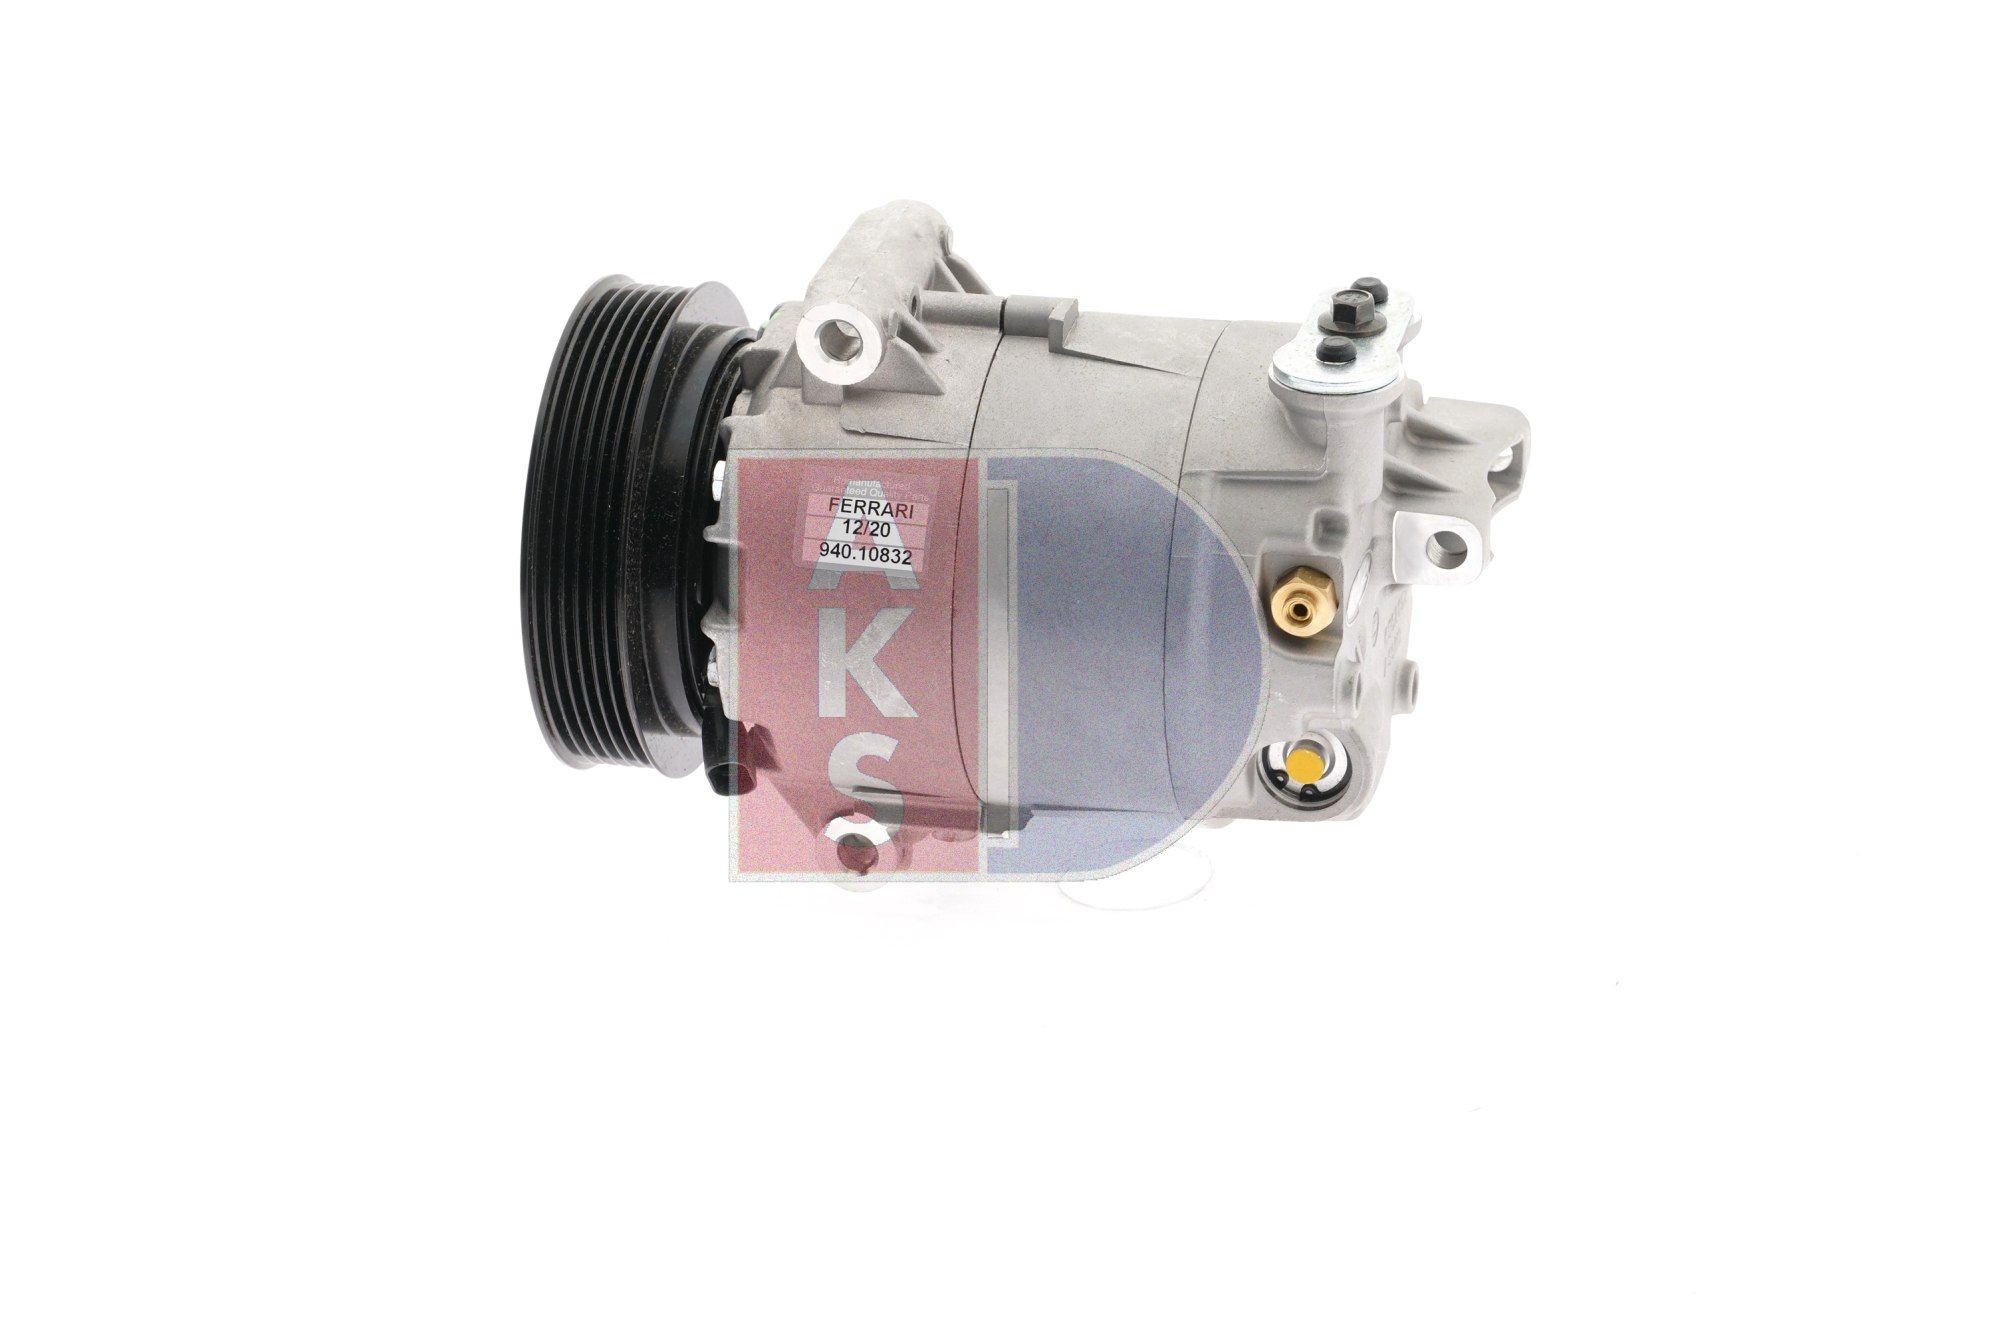 Air conditioning compressor 850058N from AKS DASIS